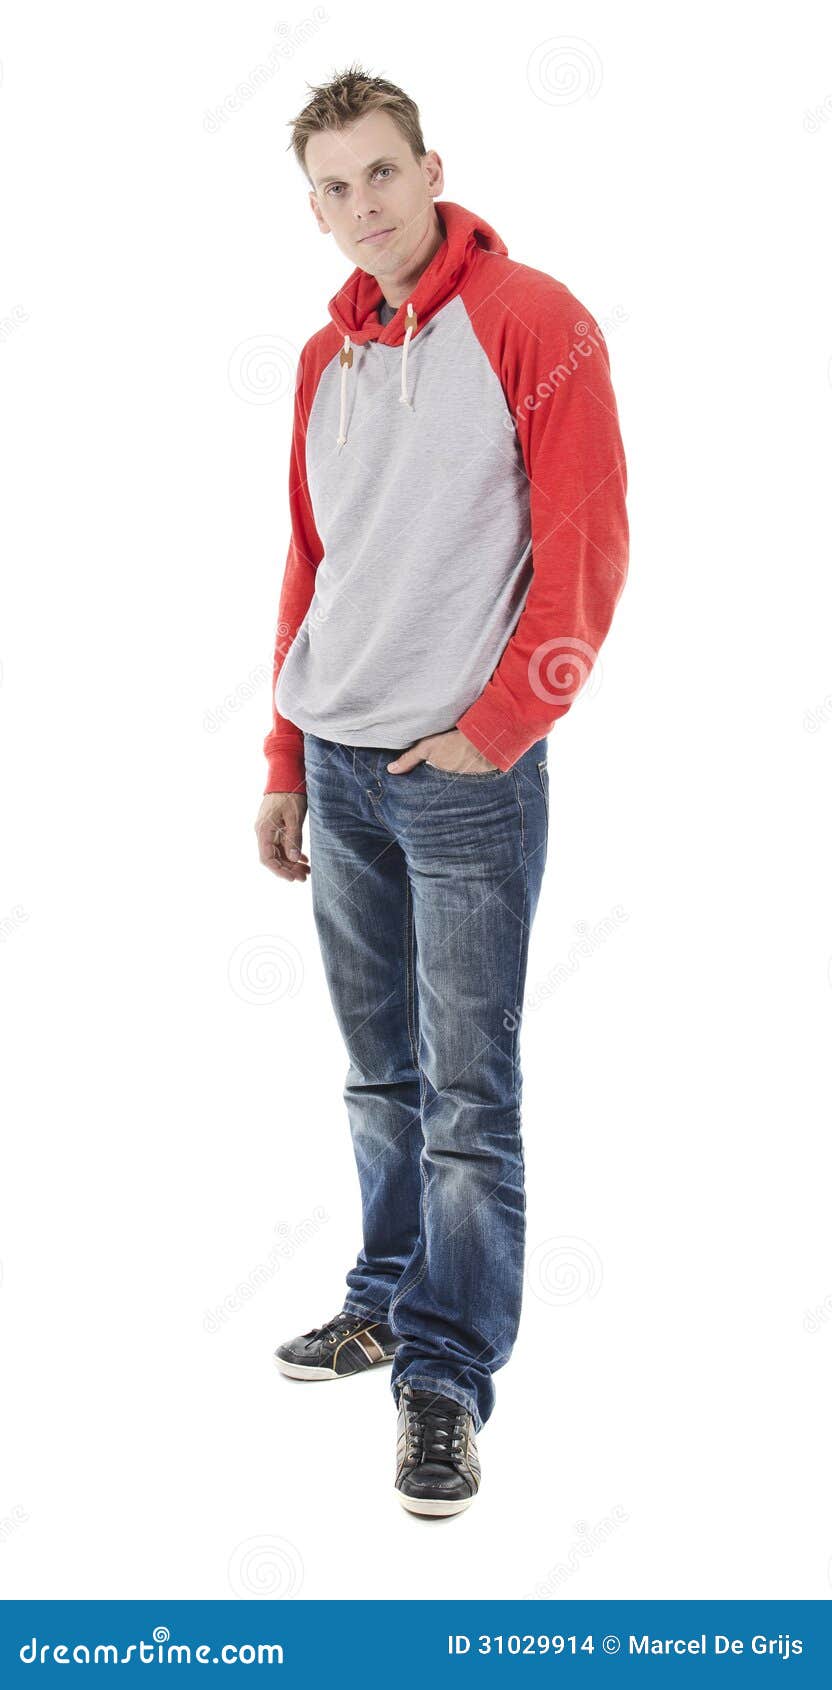 Casual Man Standing Or Posing Stock Photo Image Of Cheerful Male 31029914 Fashion model poses male poses top male models photography poses for men fashion photography chair photography look fashion street fashion. dreamstime com